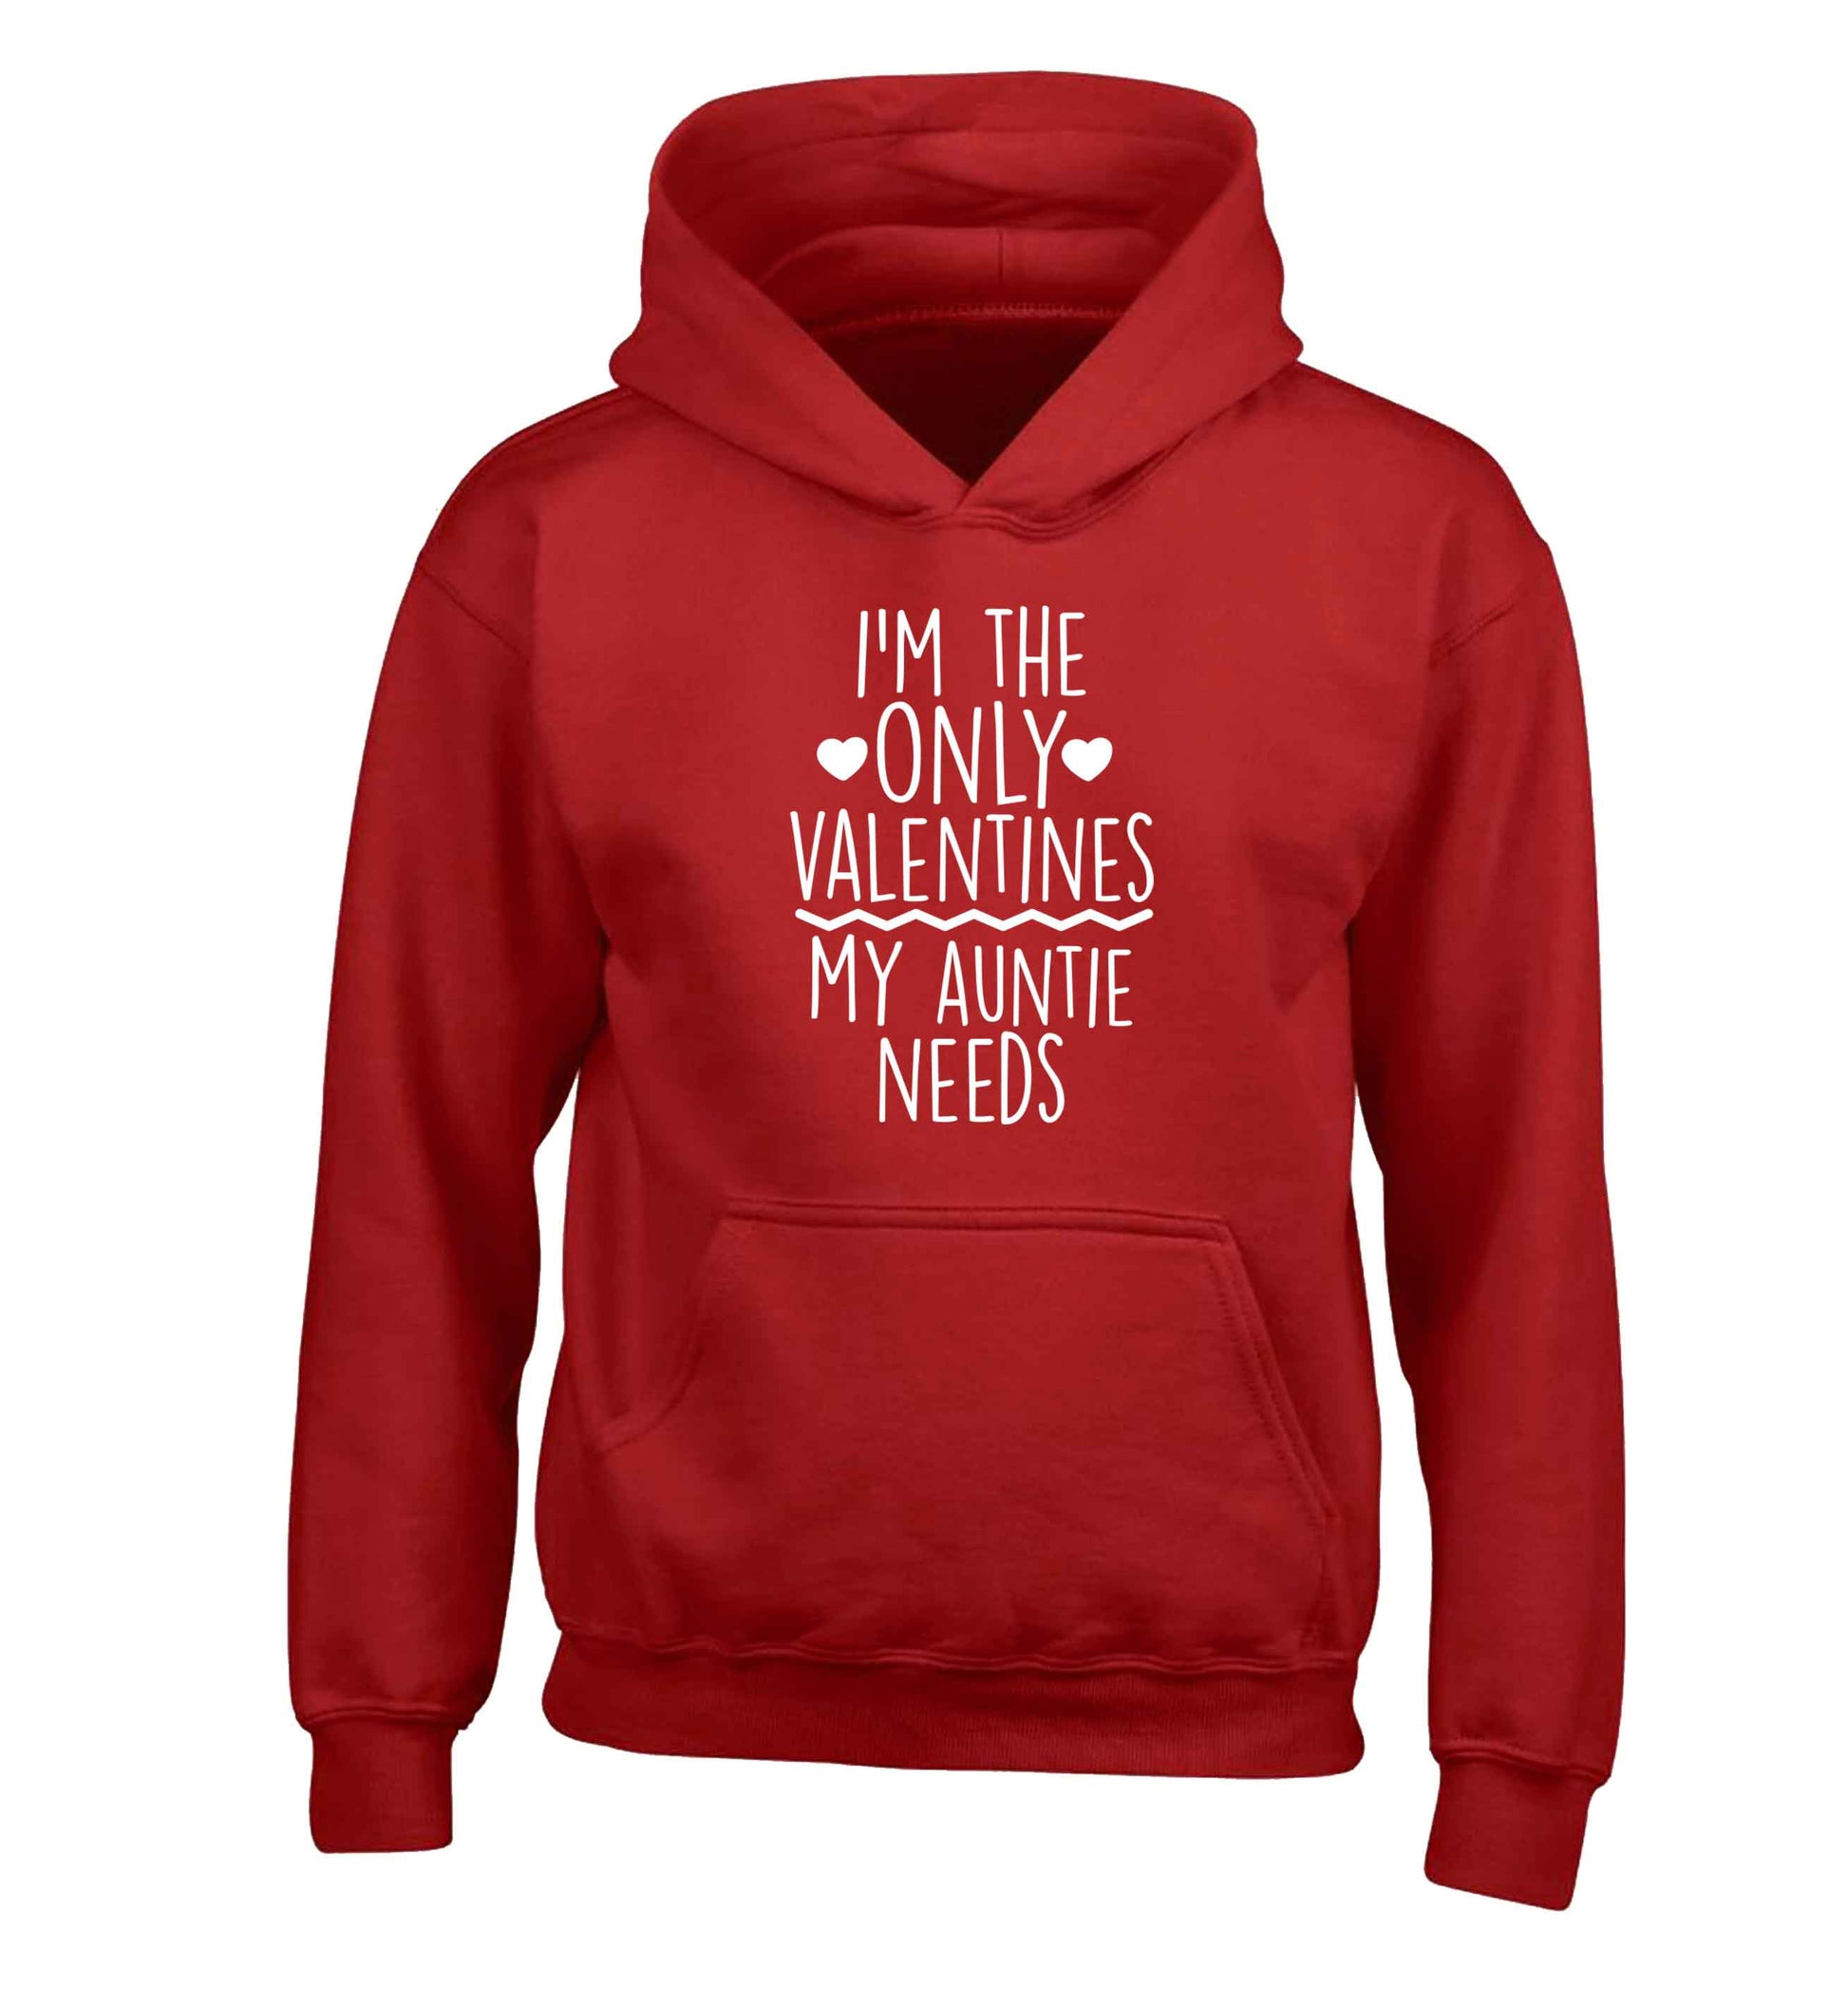 I'm the only valentines my auntie needs children's red hoodie 12-13 Years